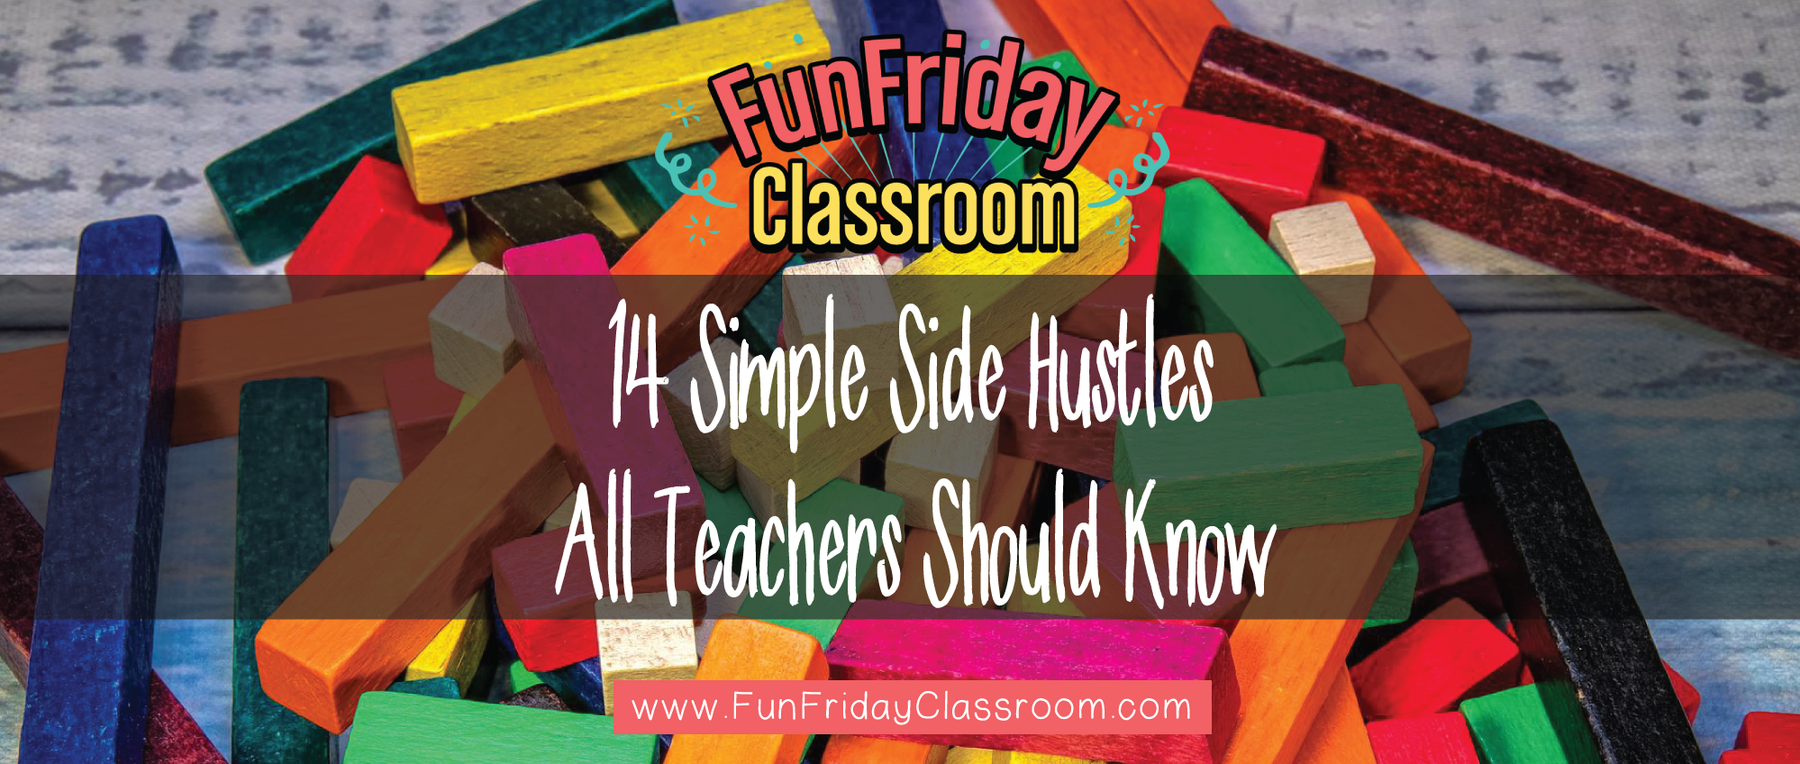 14 Simple Side Hustles All Teachers Should Know